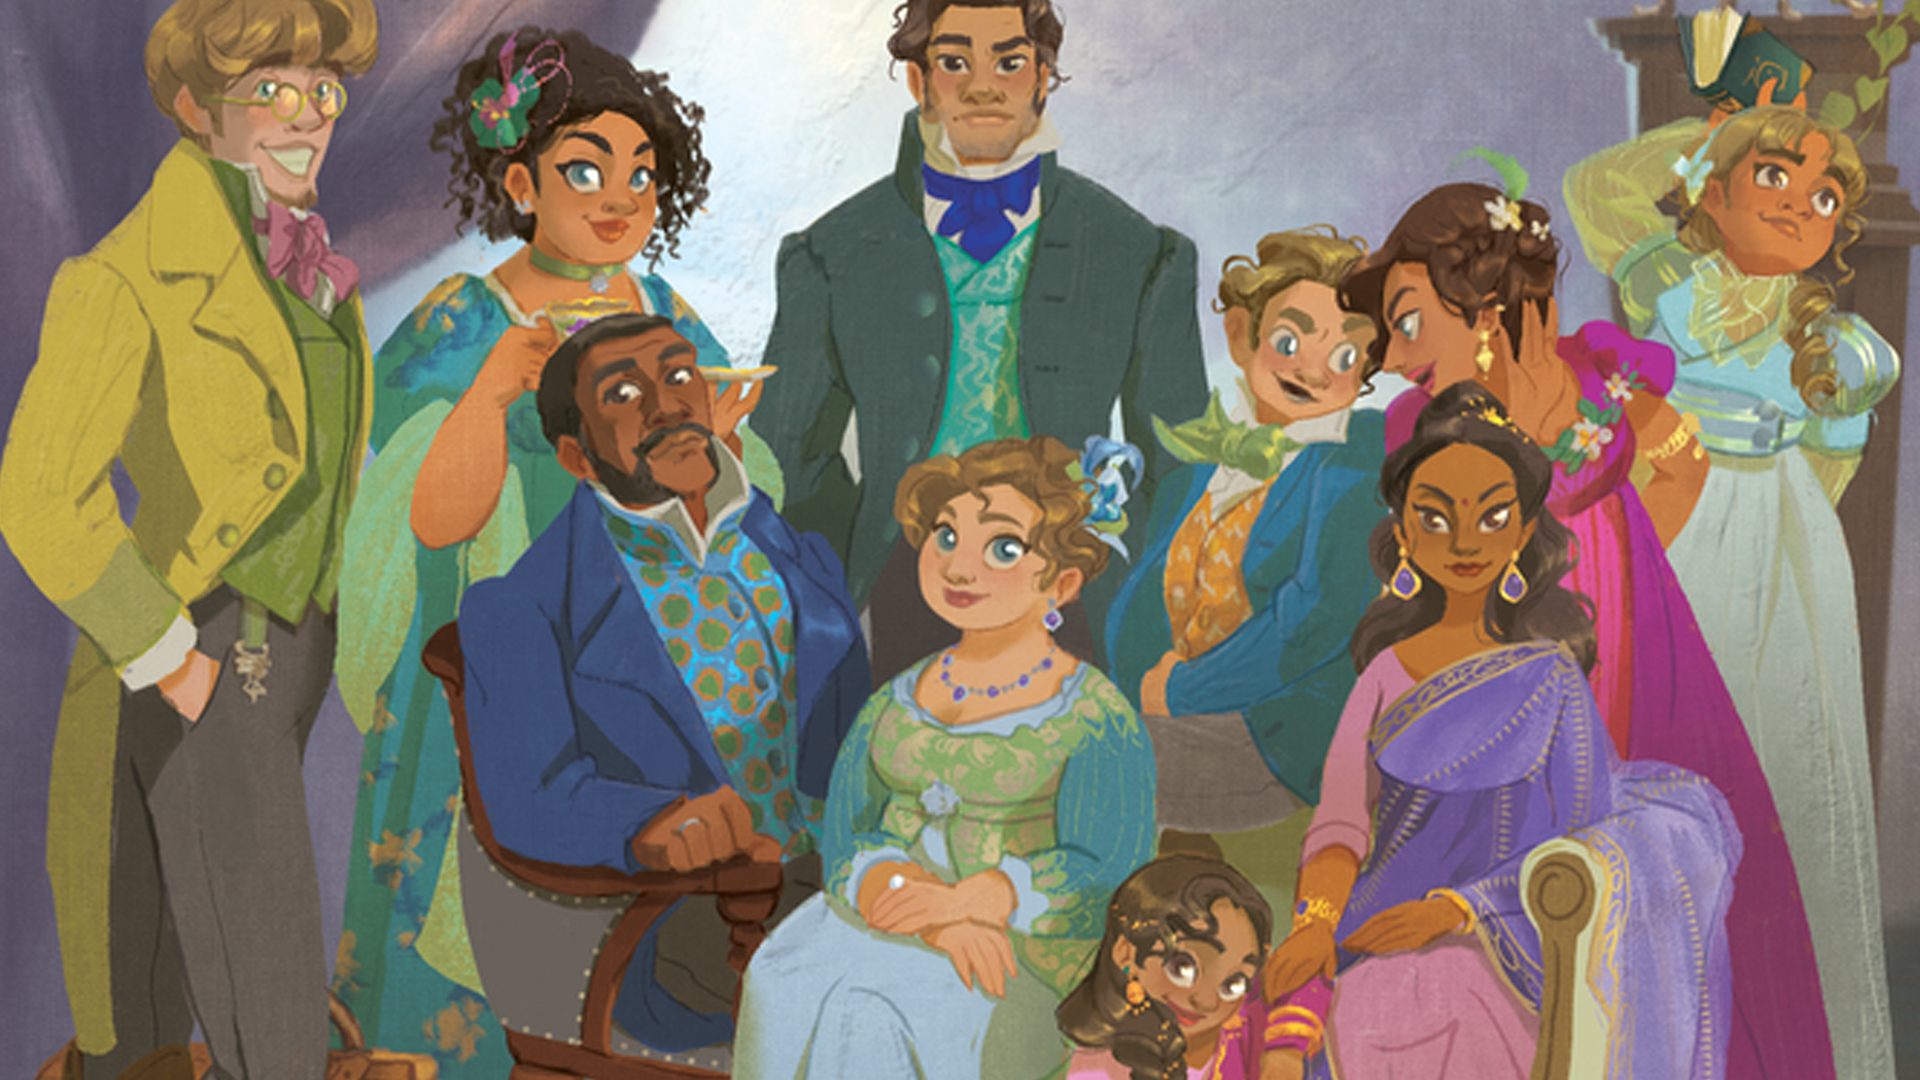 Artwork for Regency, featuring a collection of different characters wearing a variety of period-style outfits from different cultures.